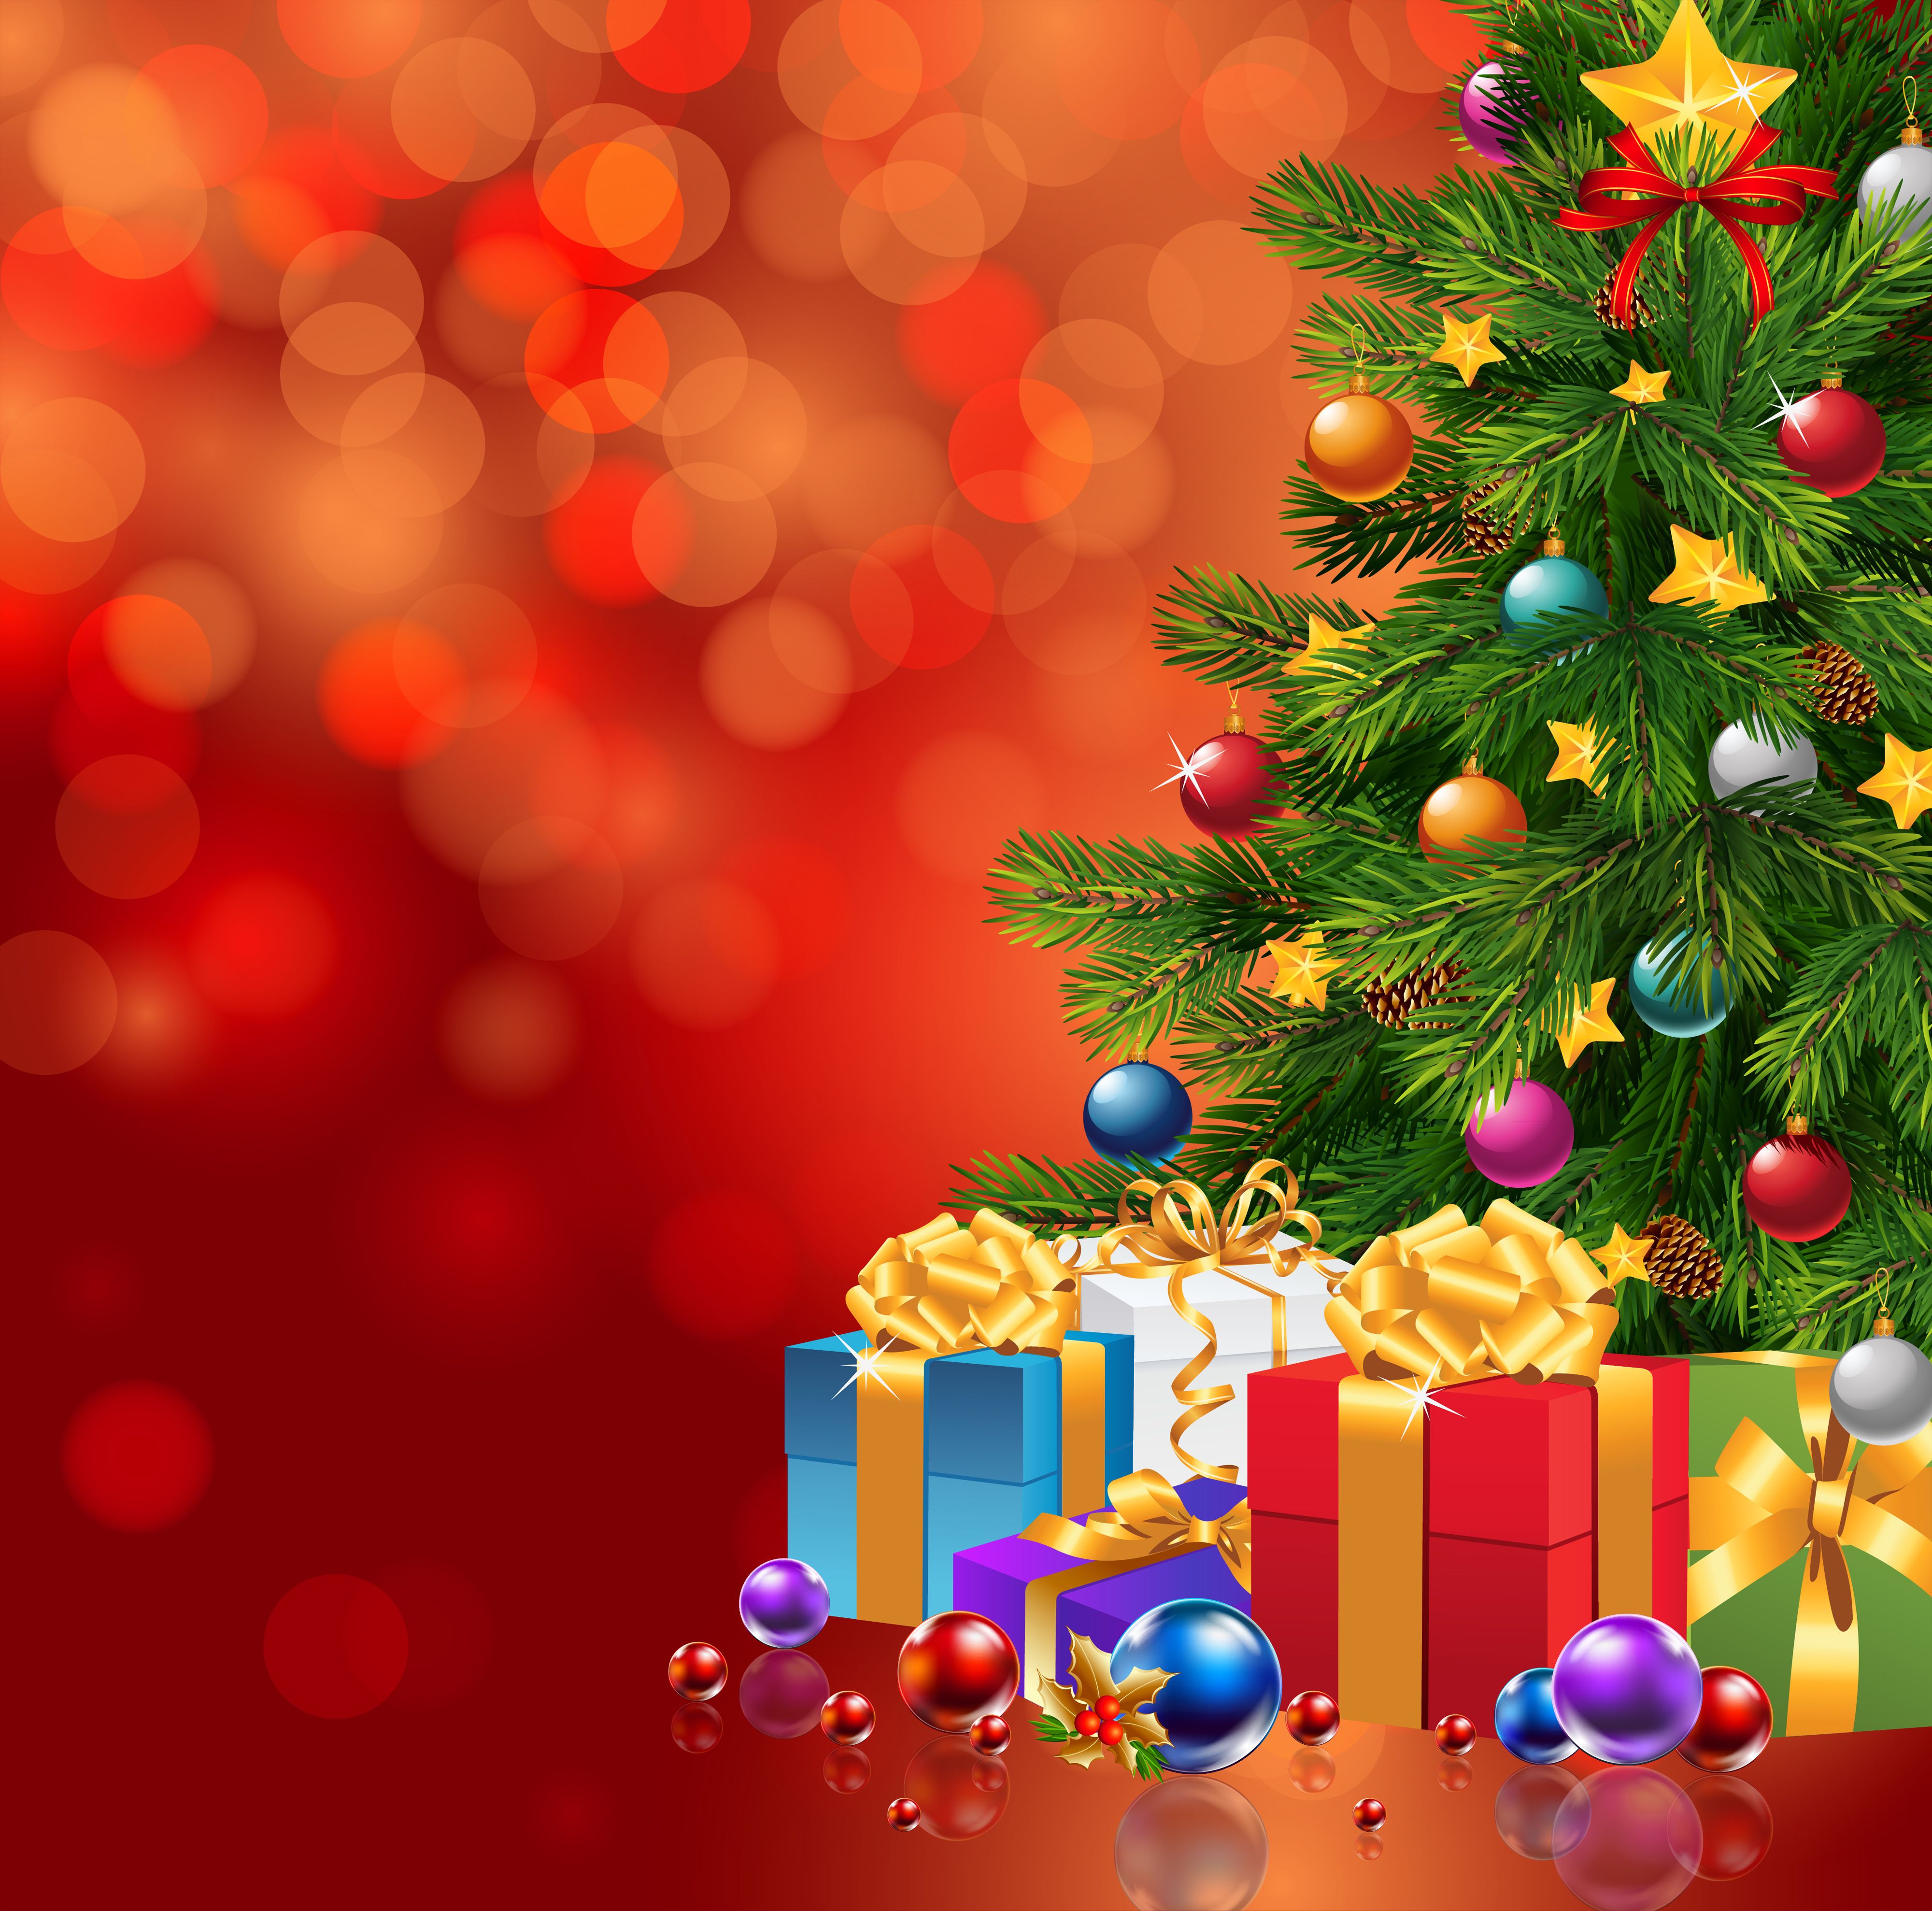 Red Christmas Background With Xmas Tree And Gifts Quality Image And Transparent PNG Free Clipart